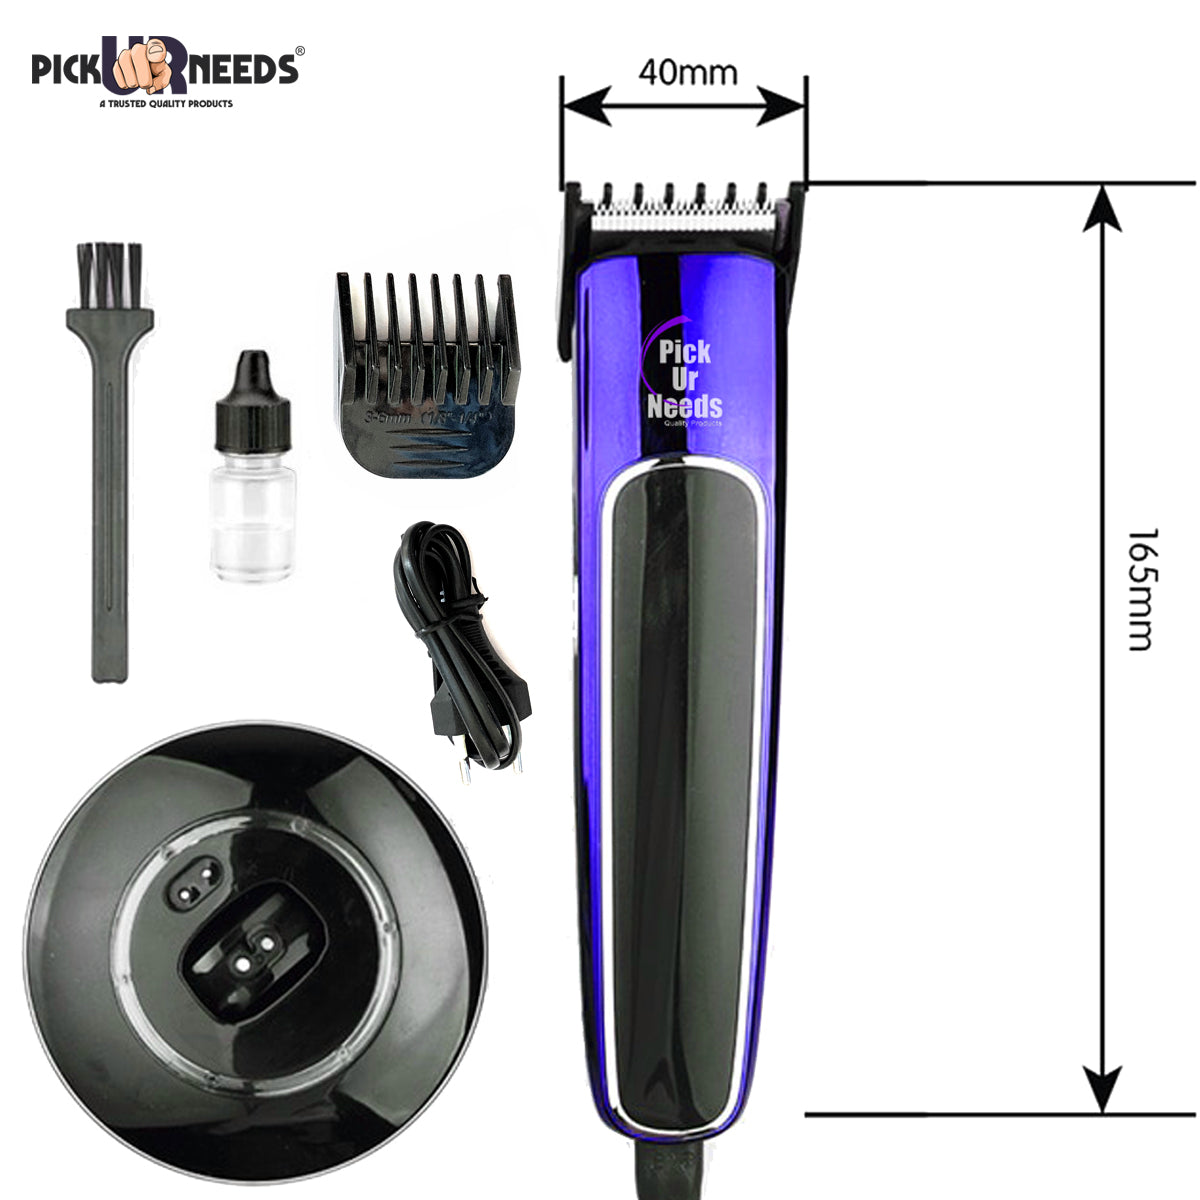 Pick Ur Needs Professional Rechargeable(Desktop Charger & USB) Cordless Beard and Hair Trimmer For Men, 45 Mins Runtime For Grooming